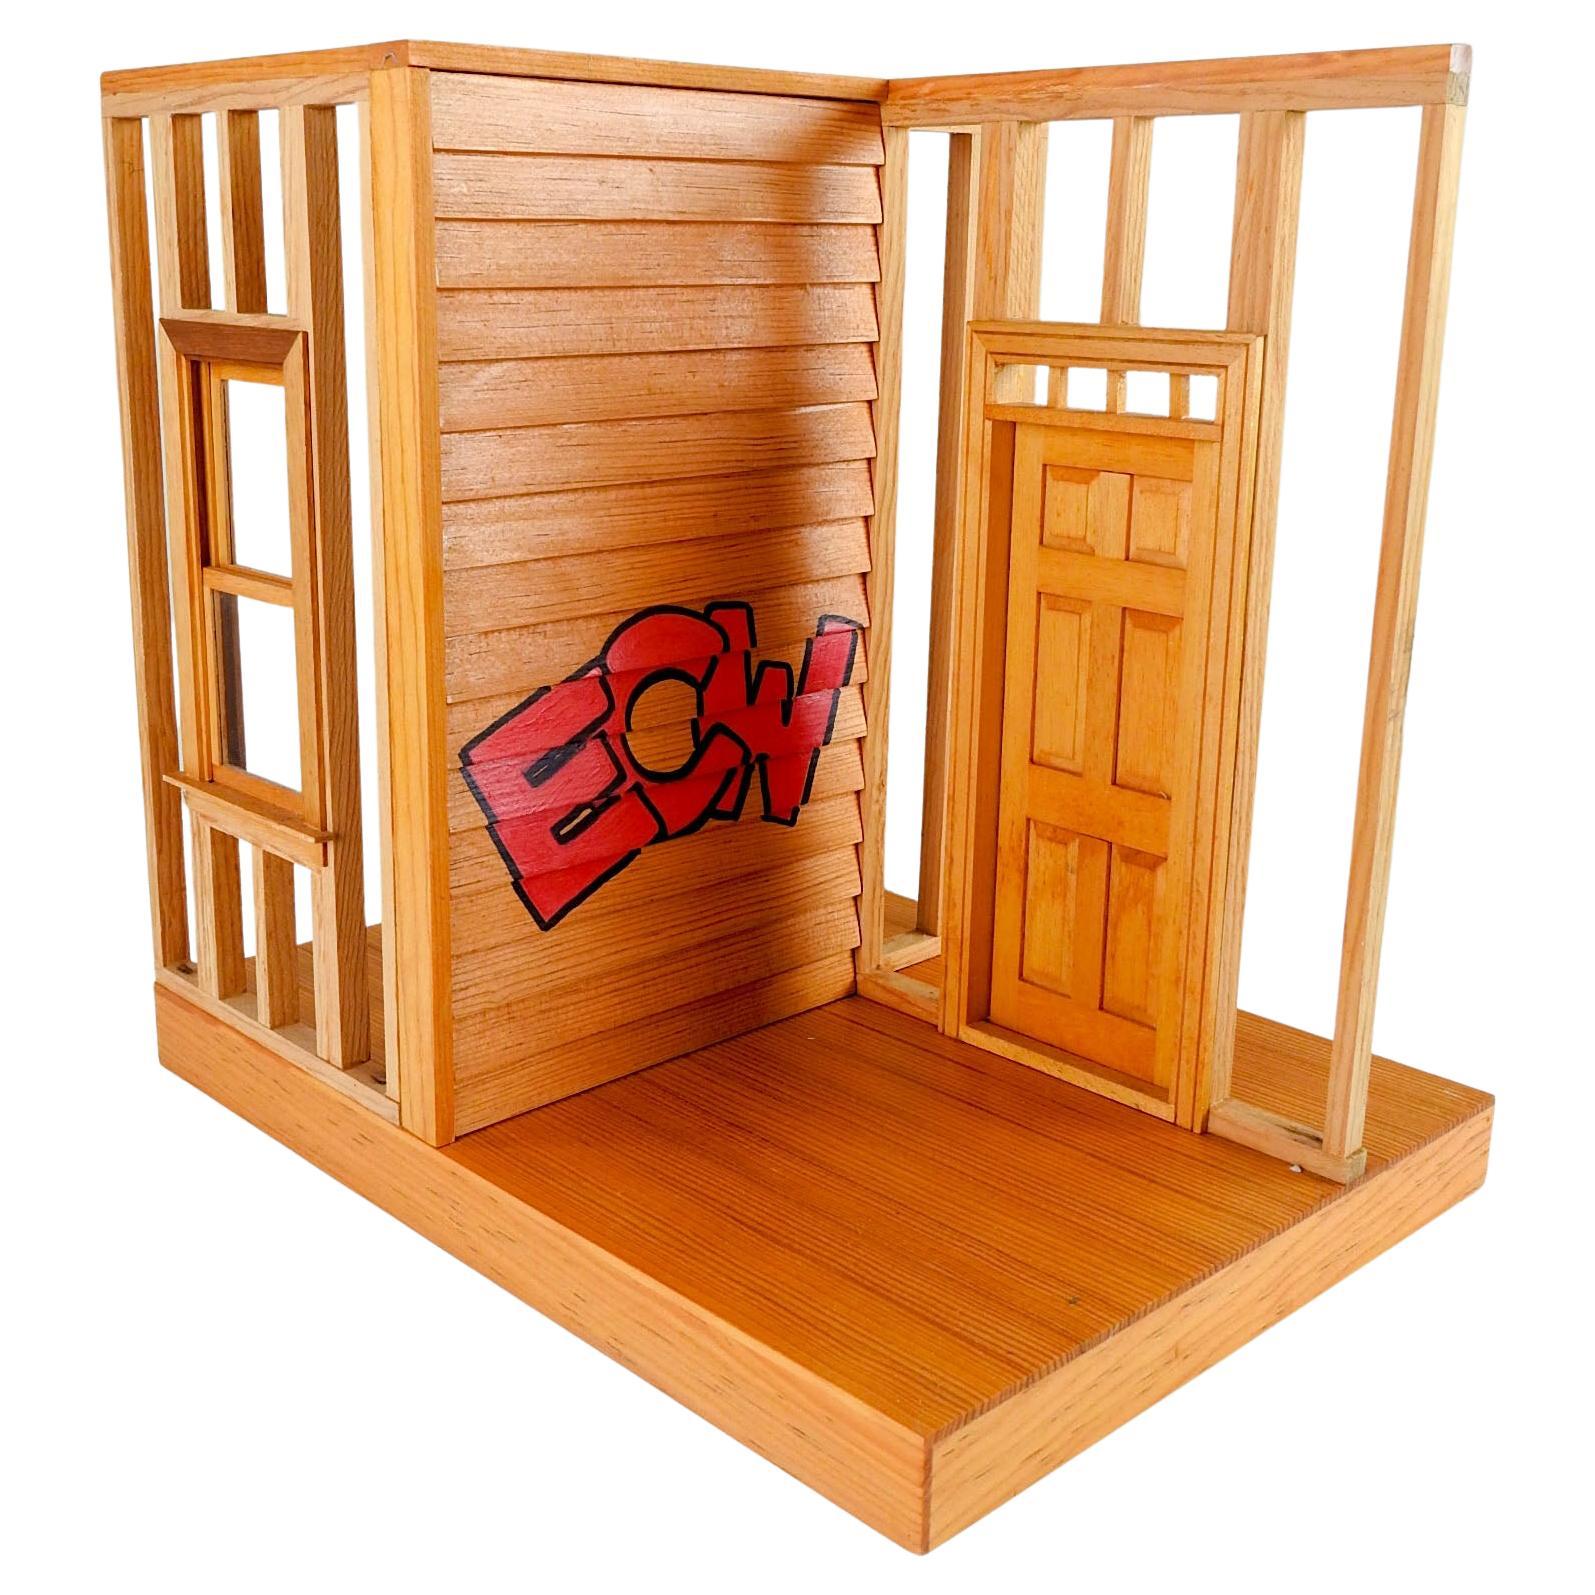 Eric Weller Abstract Graffiti Wood House Sculpture For Sale